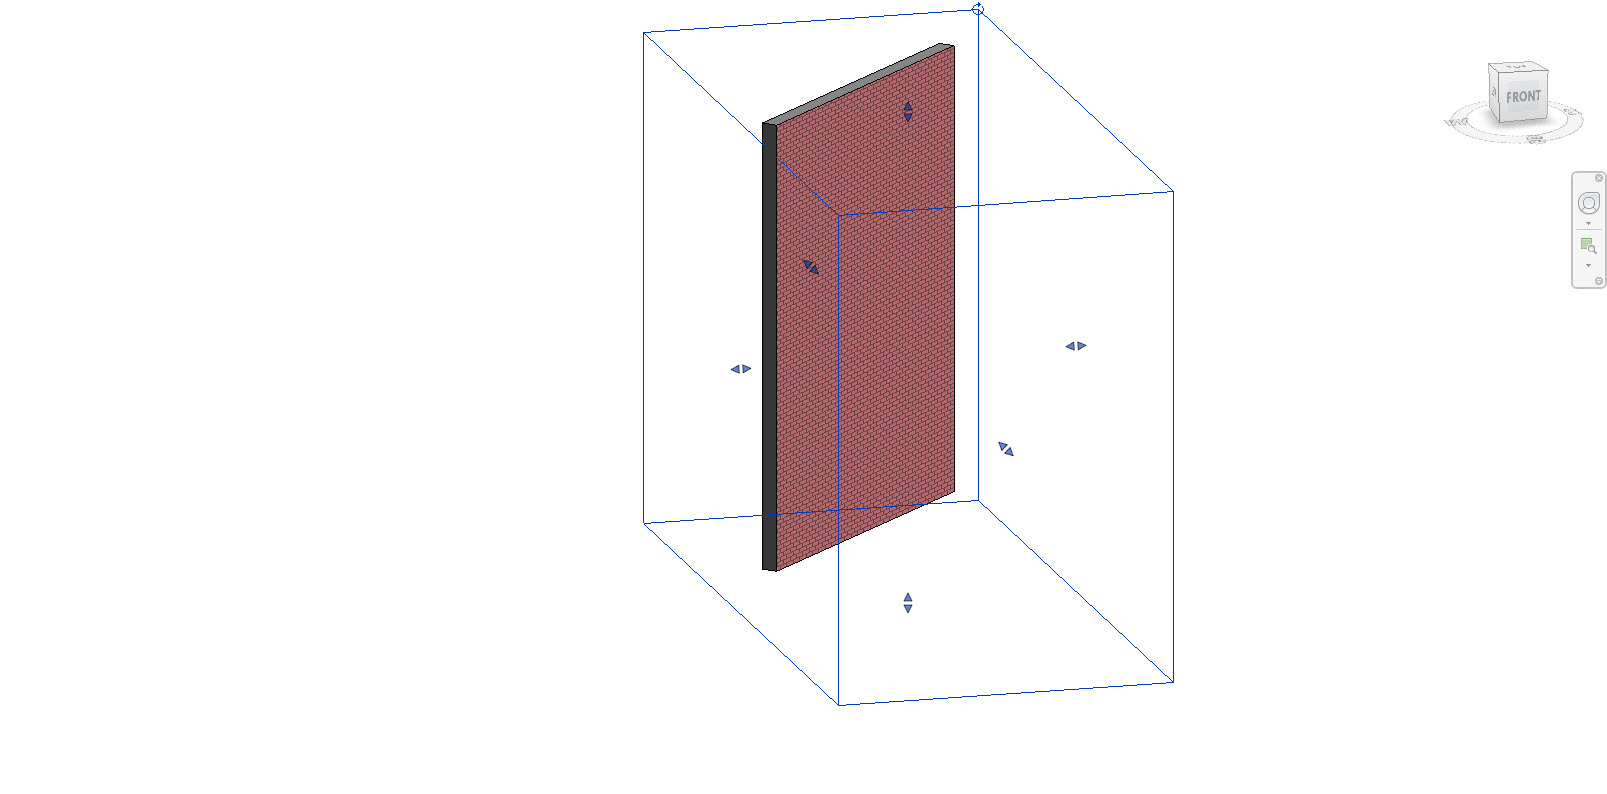 s4_Revit_focus_on_the_right_red_wall_only.jpg